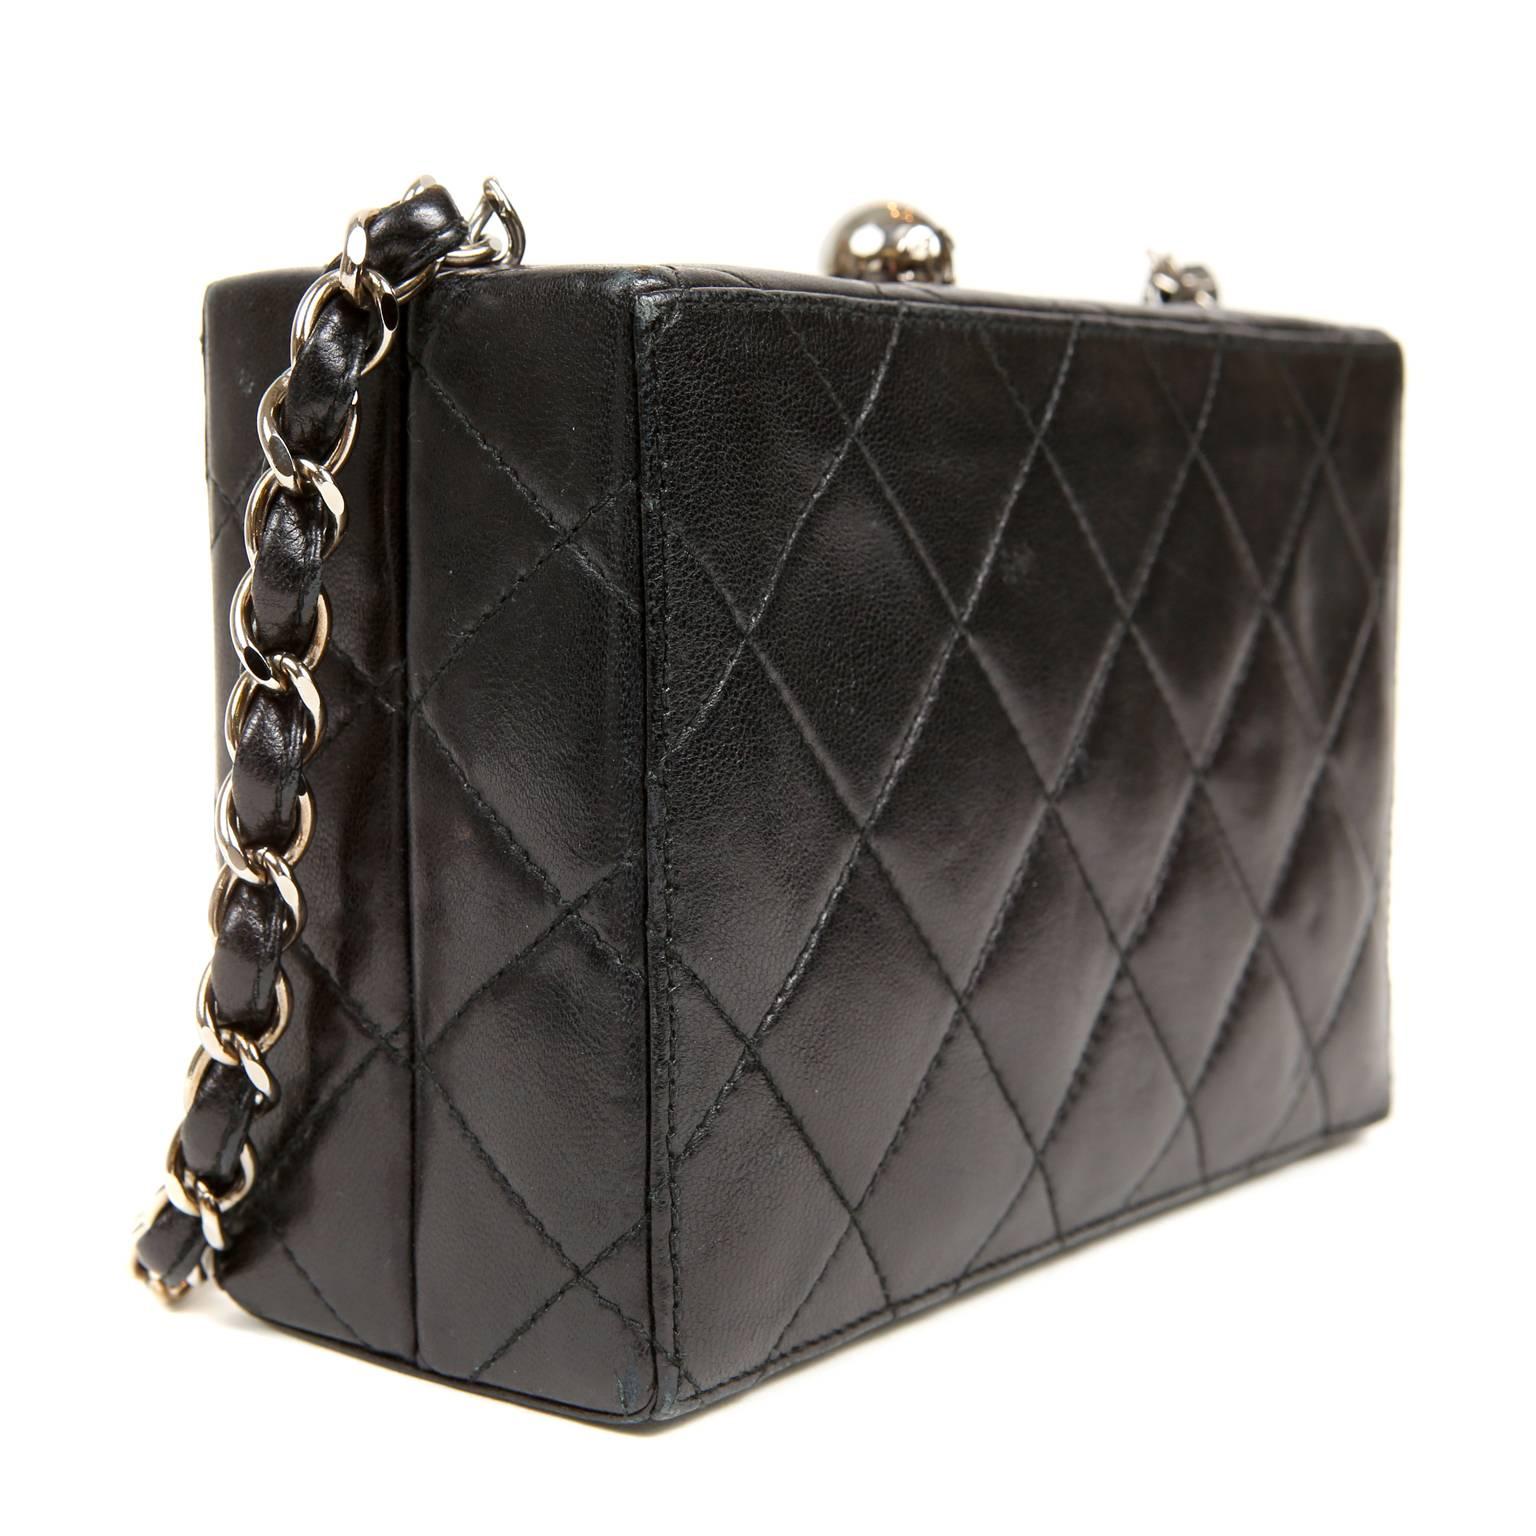 Chanel Black Quilted Leather Mini Box Bag In Excellent Condition For Sale In Malibu, CA